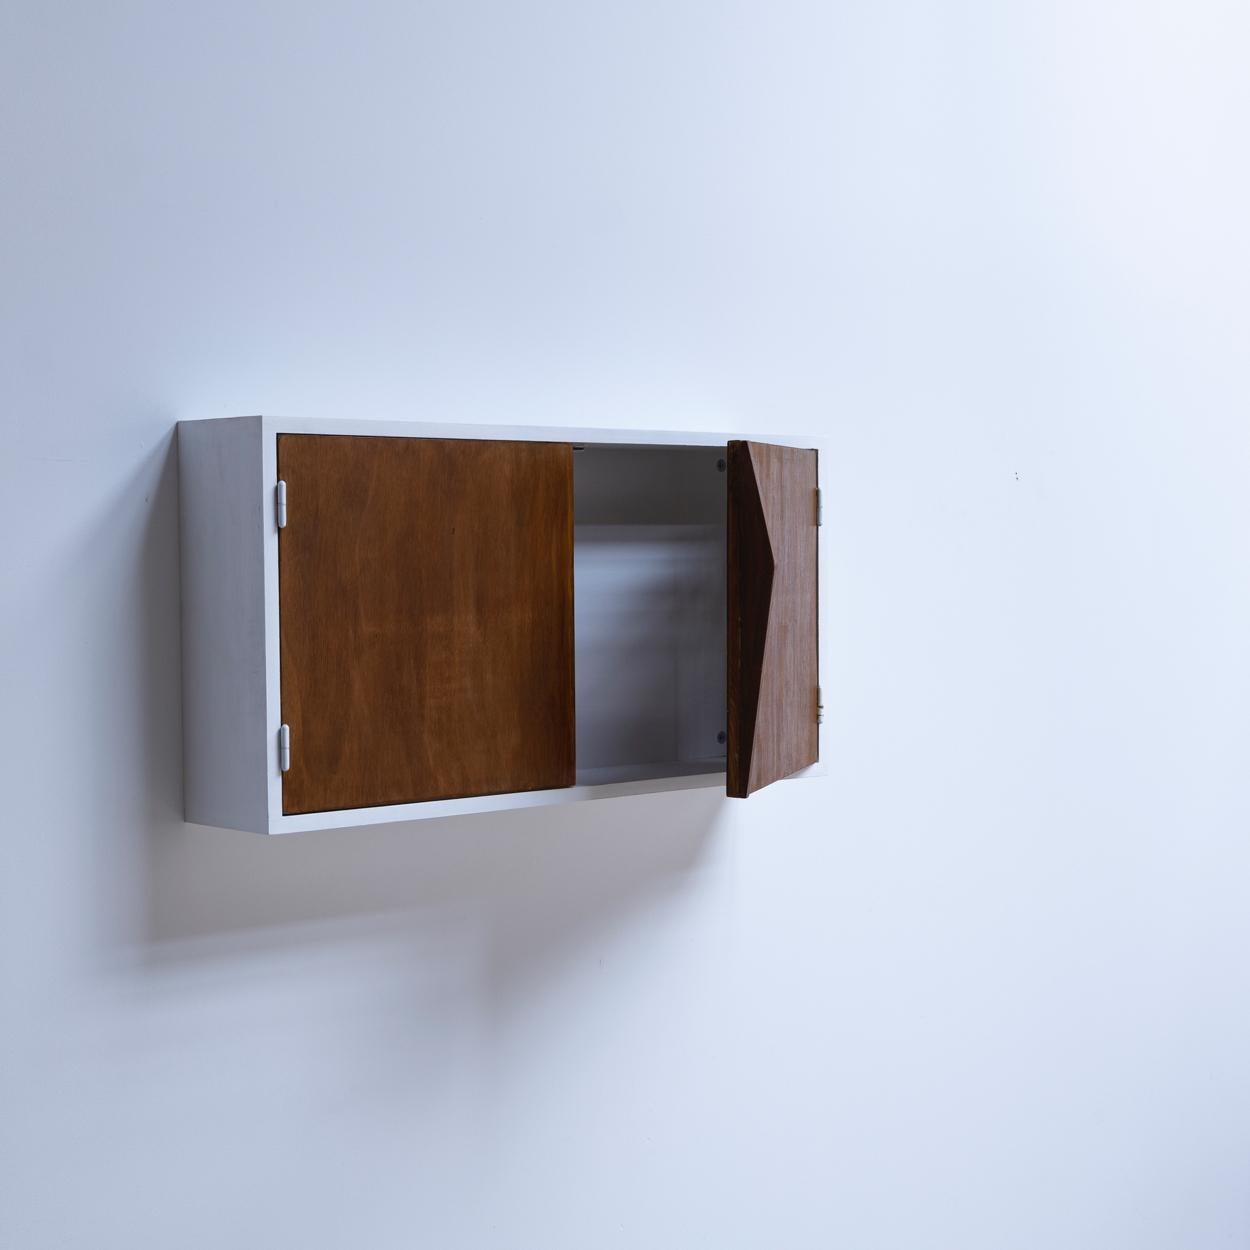 A wooden wall cabinet with the doors that designed by Charlotte Perriand and manufactured by Ateliers Jean Prouvé. The doors were originally used as the indoor storage facade.
Provenance: Le Couteur building, rue Courboulay, Le Mans,